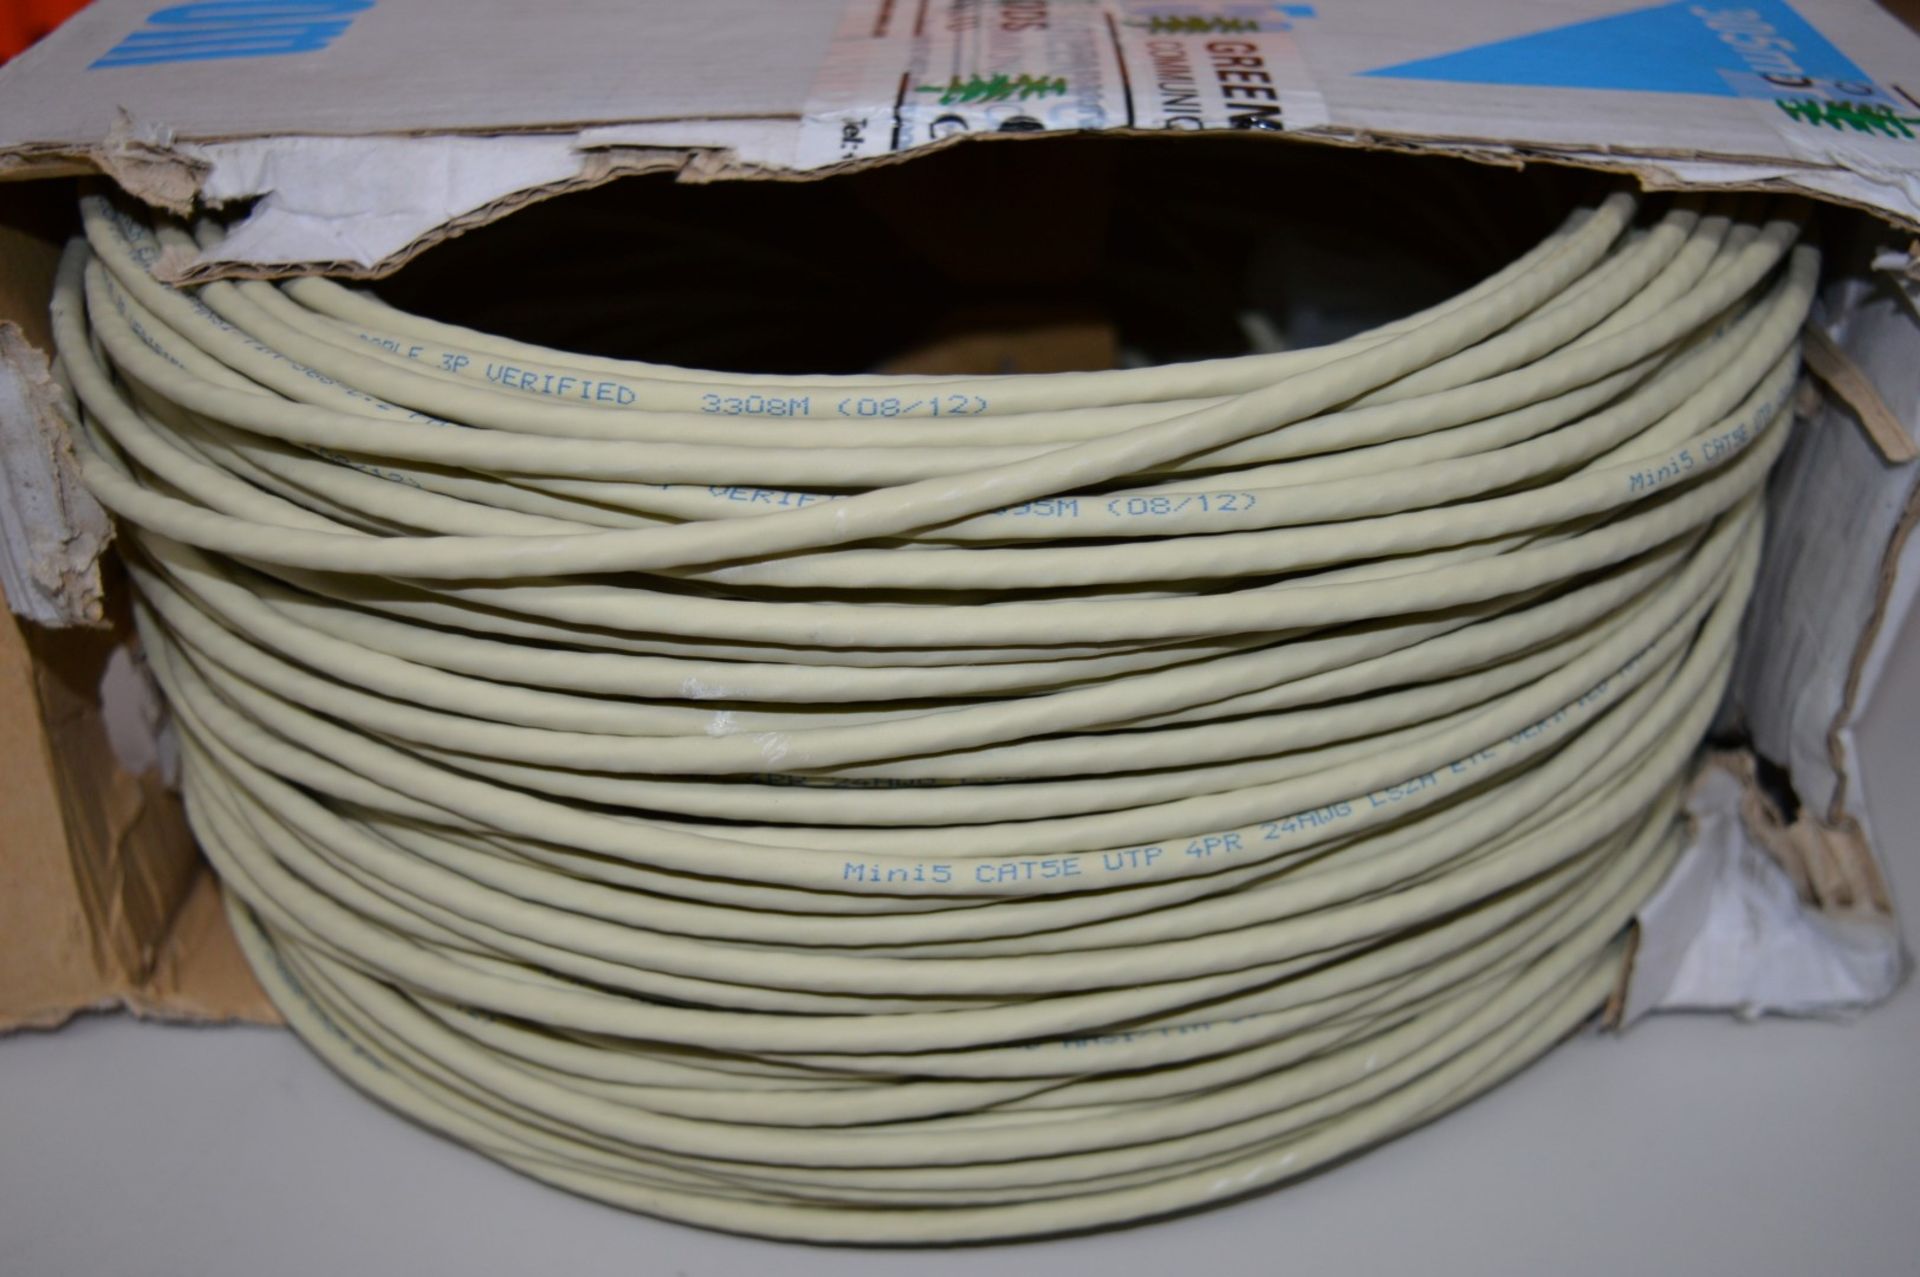 1 x Box of Mini5 Category 5e FTP LSOH Patch Cable - Part Used Box With Large Quantity Included - Box